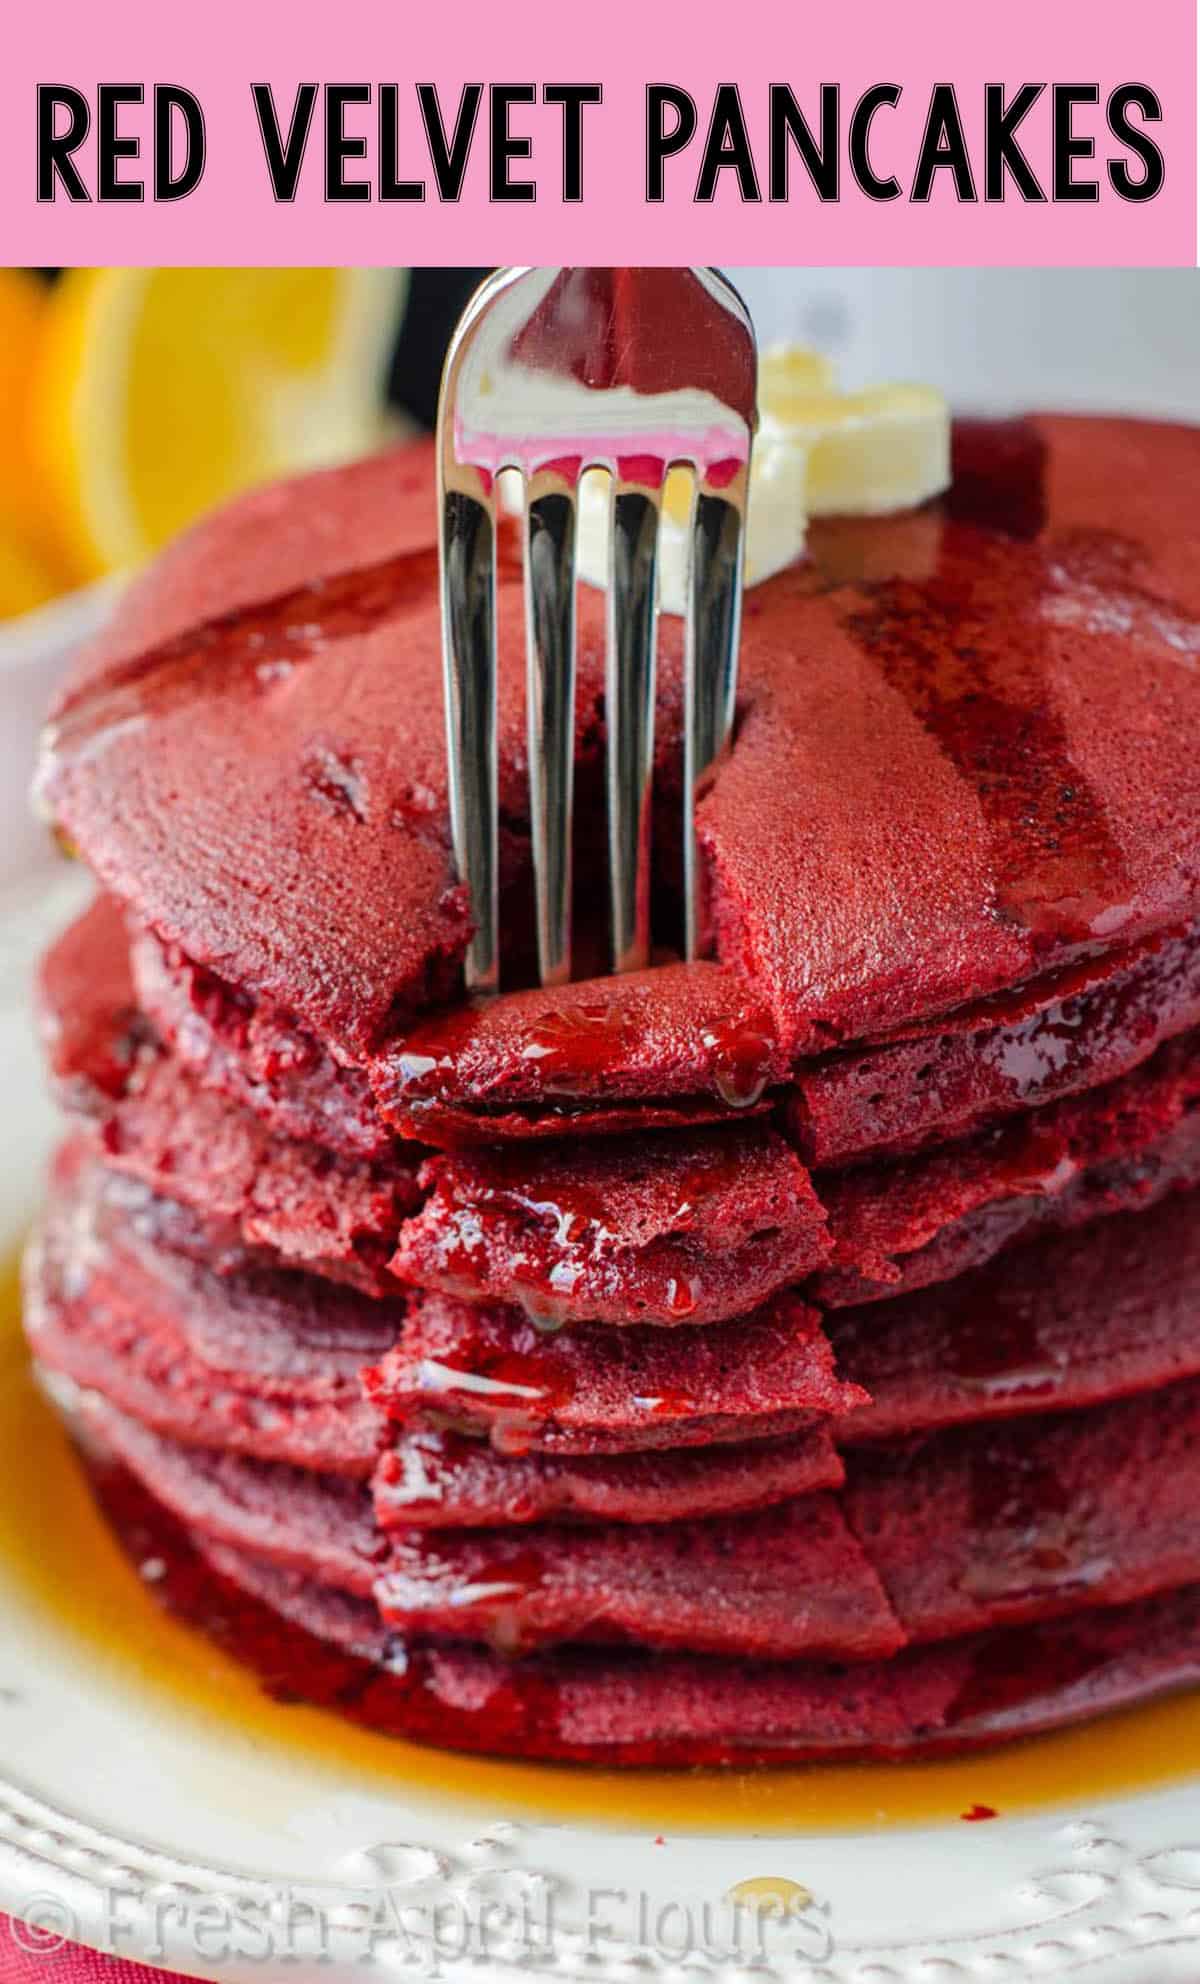 Light and fluffy pancakes made easily with red velvet cake mix. Ready in no time so you can enjoy Valentine's Day breakfast with your sweetie! via @frshaprilflours